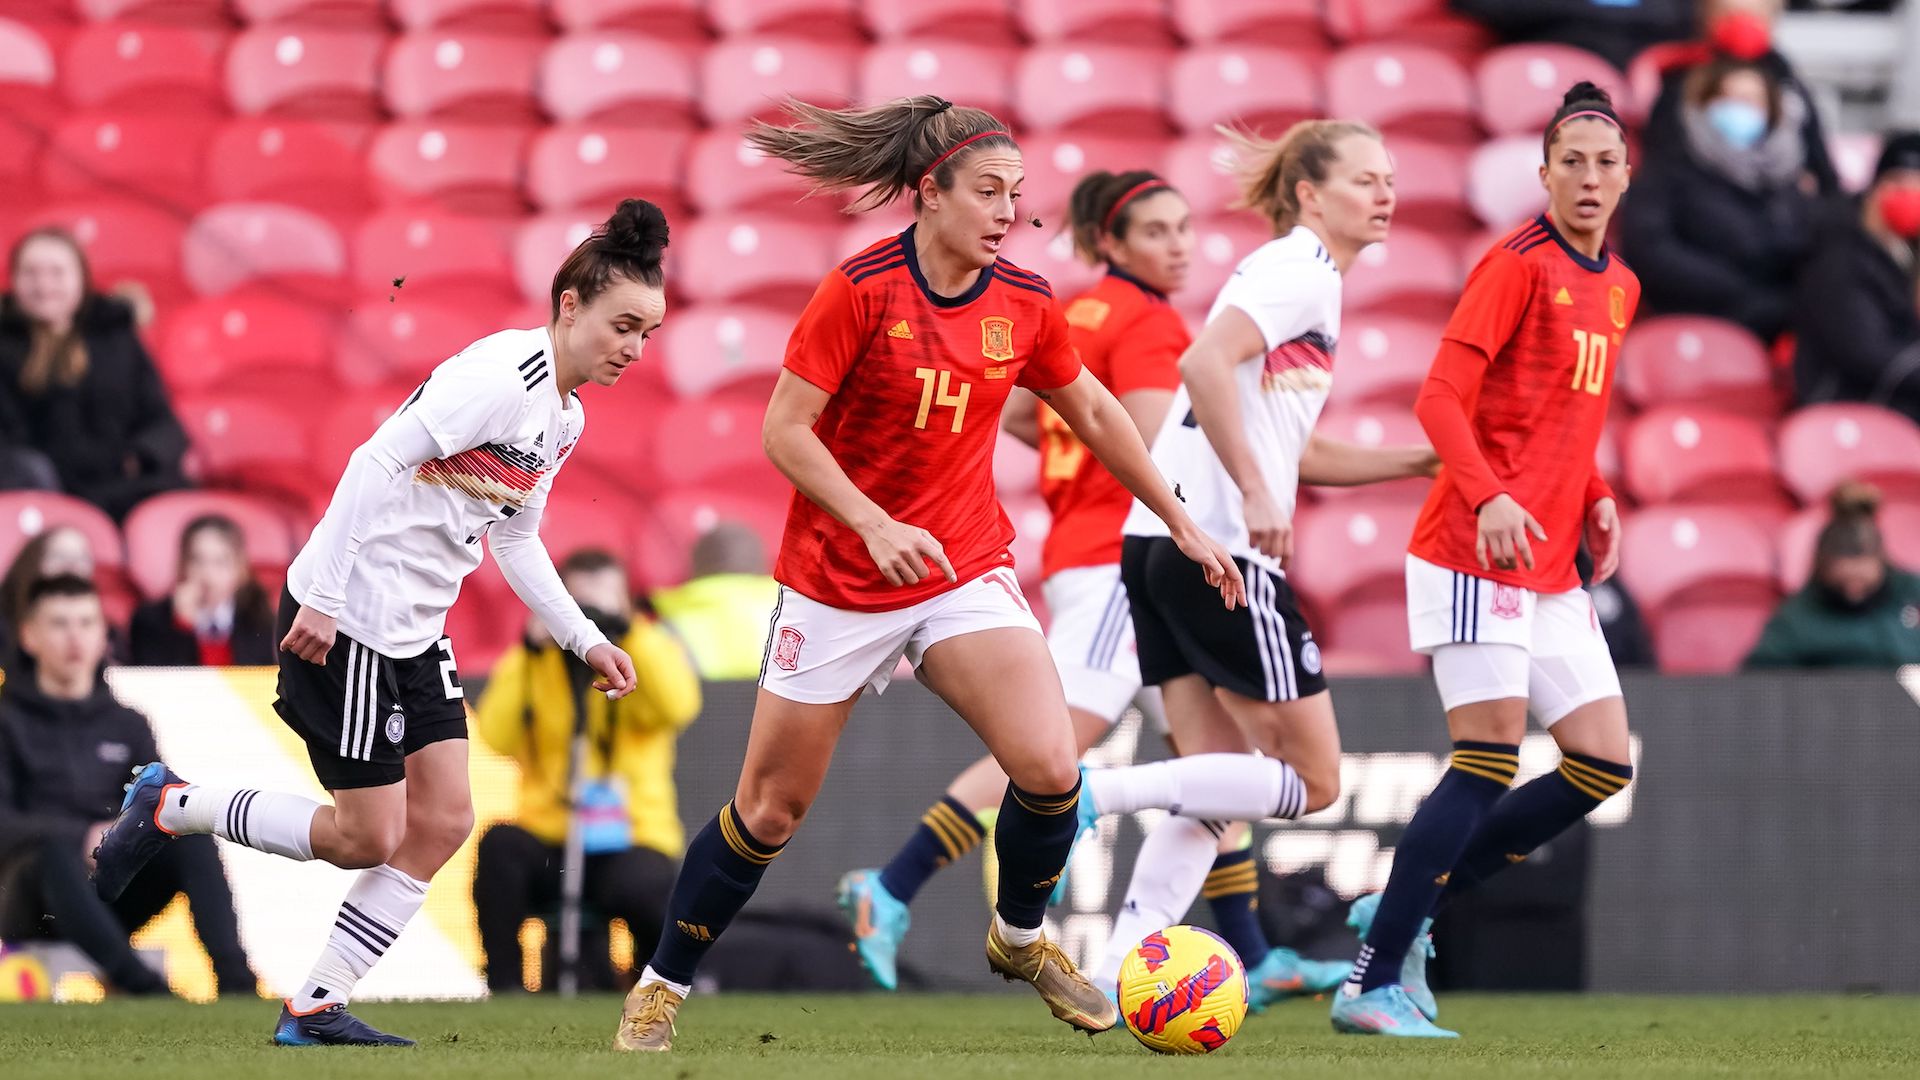 Alexia Putellas in the red shirt of spain kicks the ball with german players in white in the background